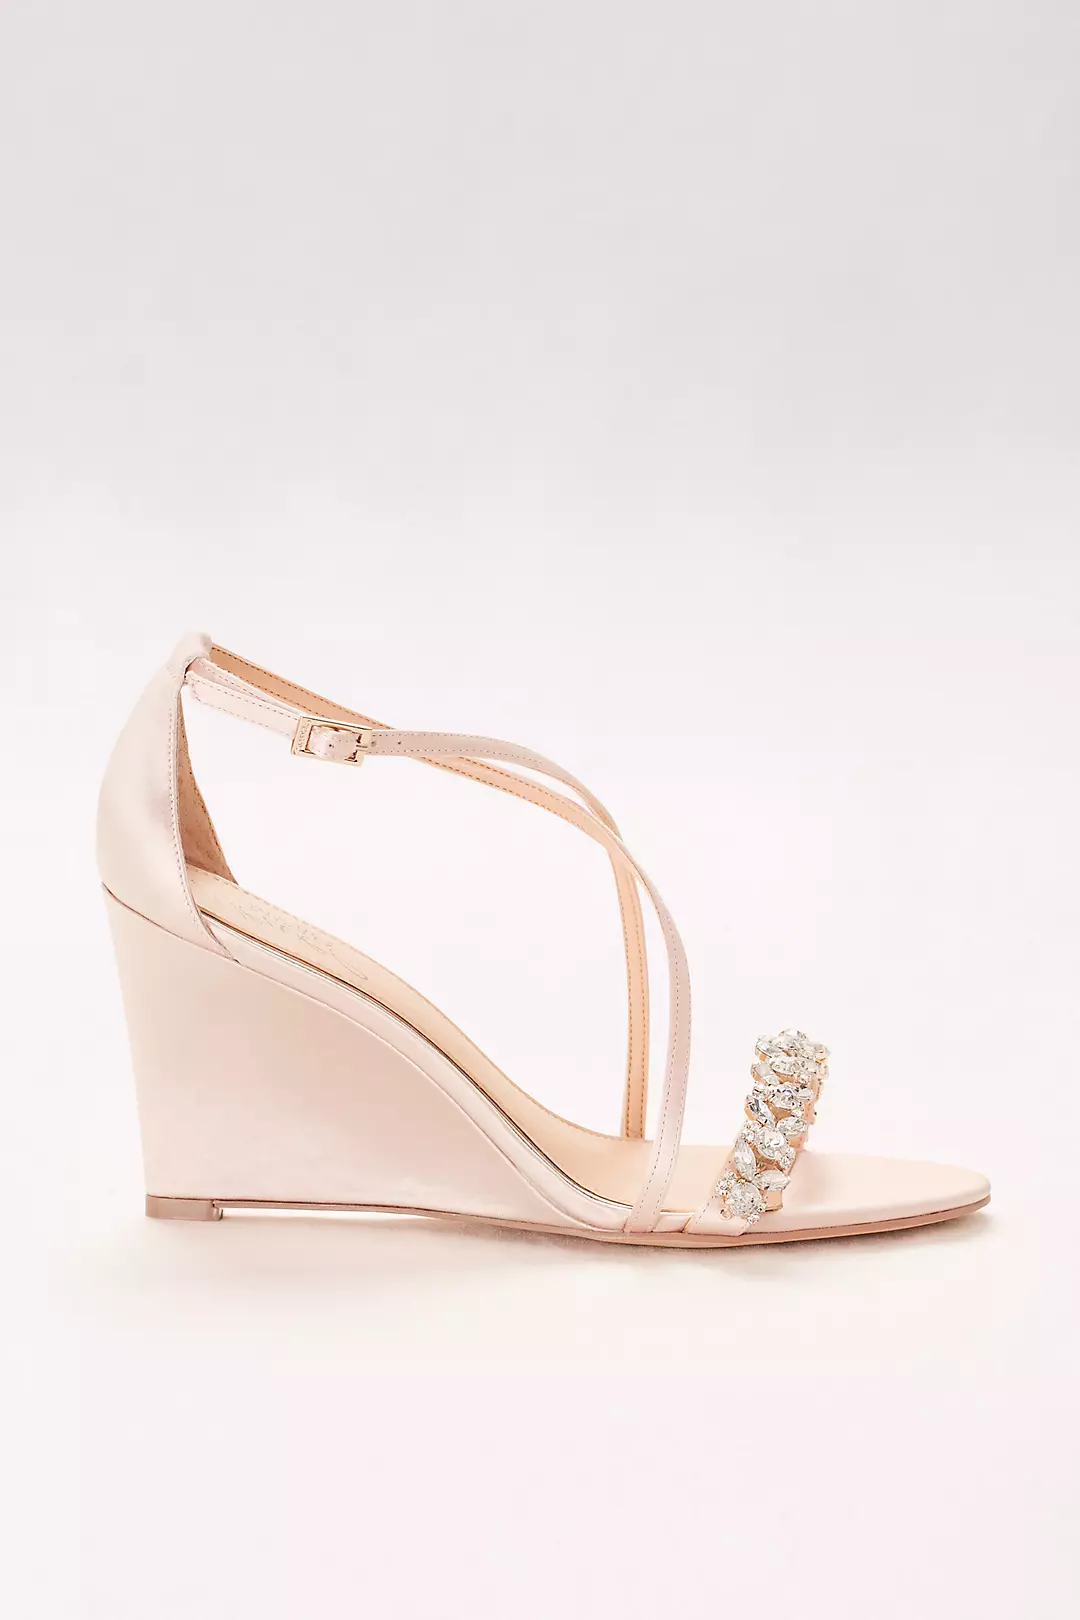 Satin and Crystal Wedges with Crisscross Straps Image 3